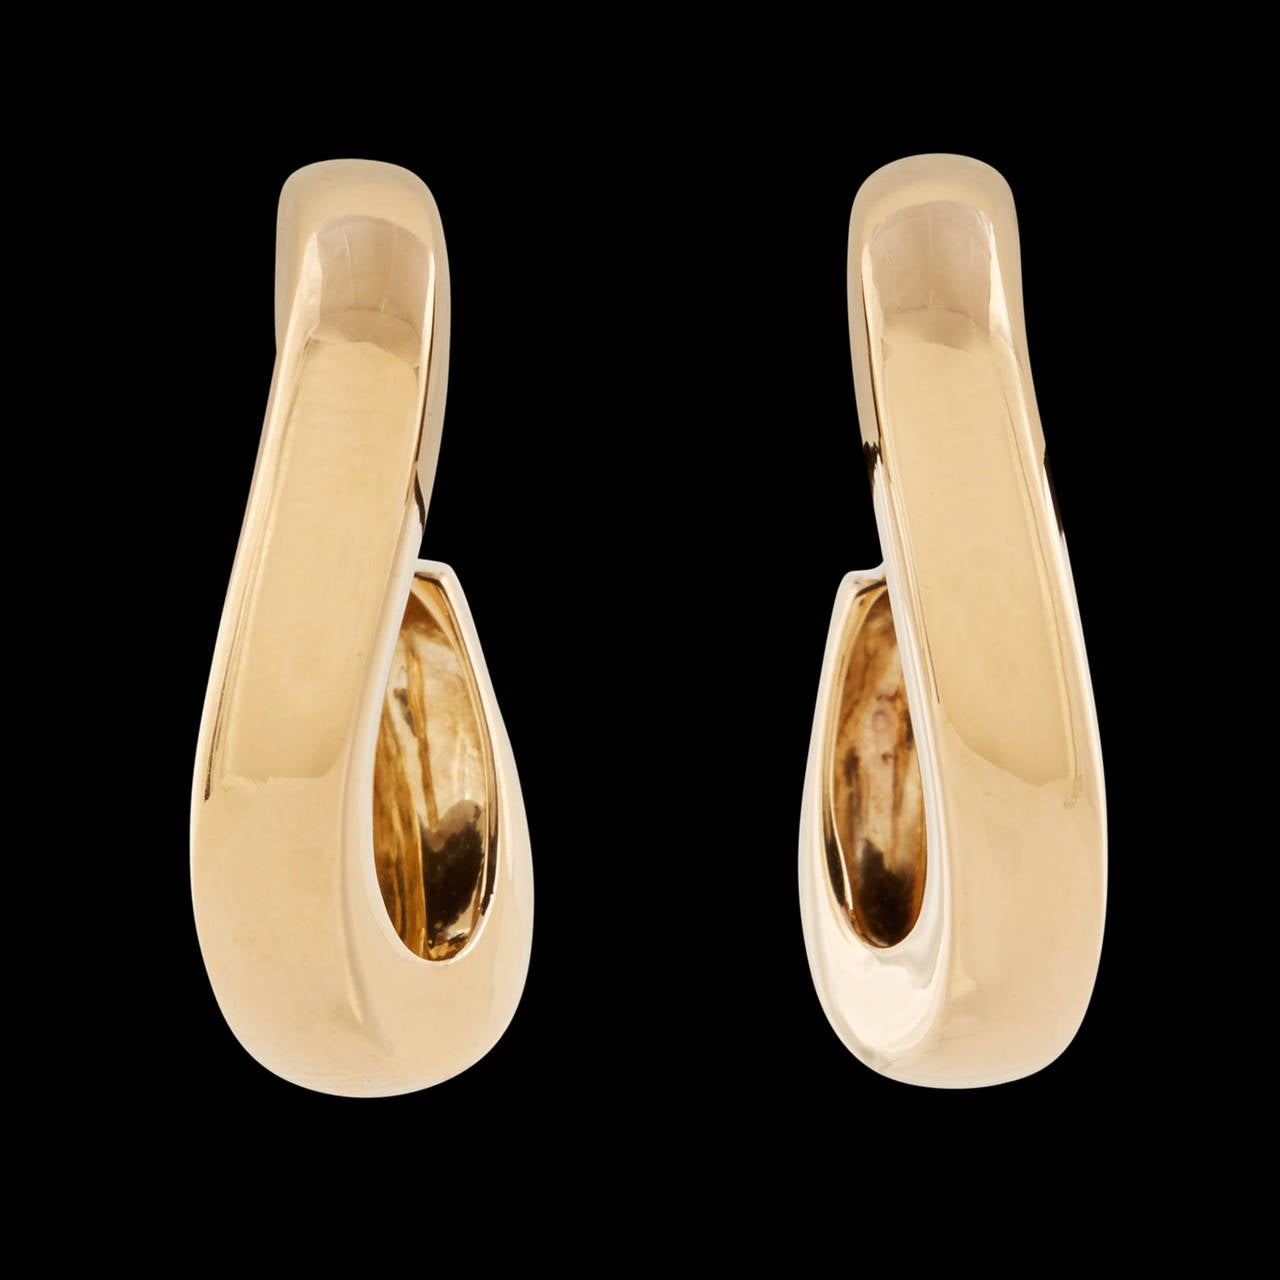 Chaumet Waltz Hoop Earrings in 18Kt Yellow Gold with Posts and Omega Backs. The hoops are 1 inch long and 5.5mm wide. The total weight of the pair is 17.4 grams. A Chaumet Certificate of Authenticity is included.